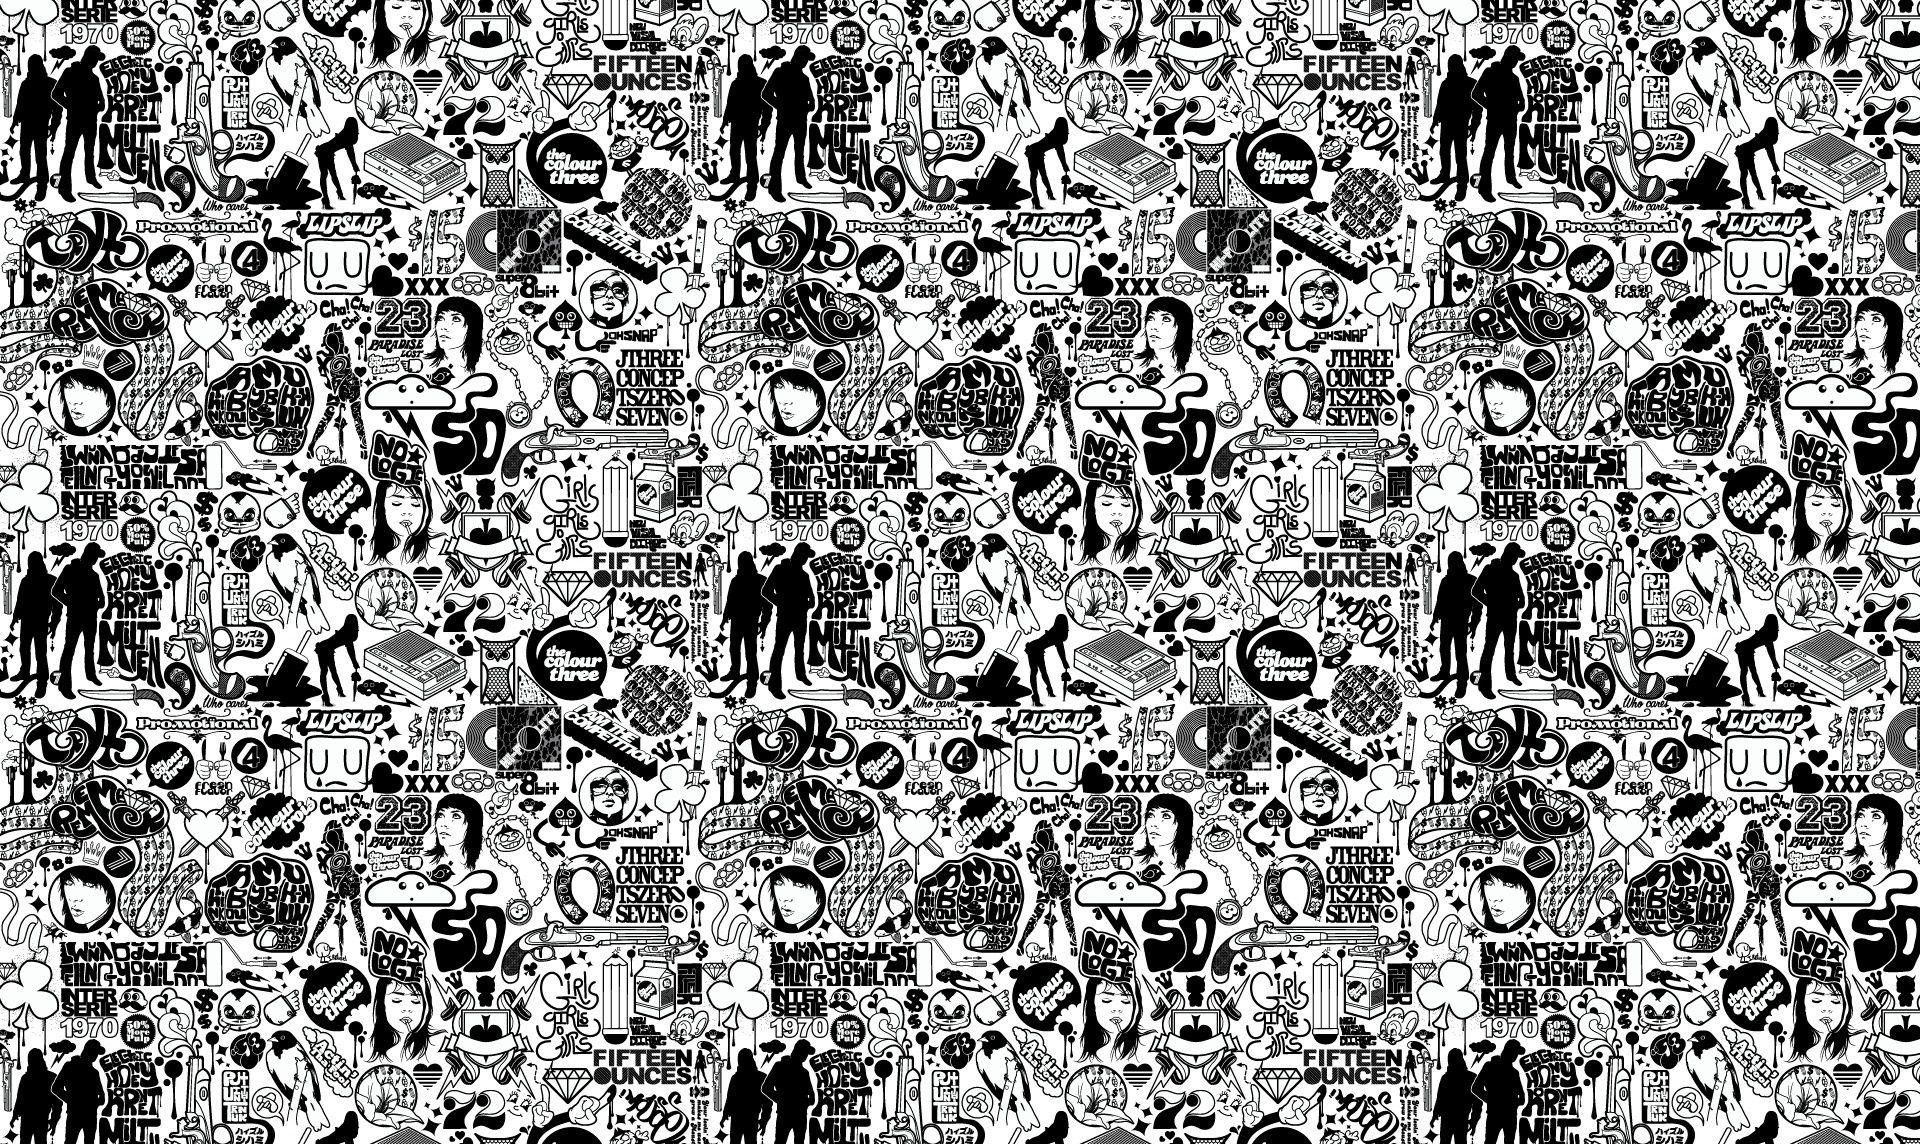 A black and white pattern with lots of different things - Graffiti